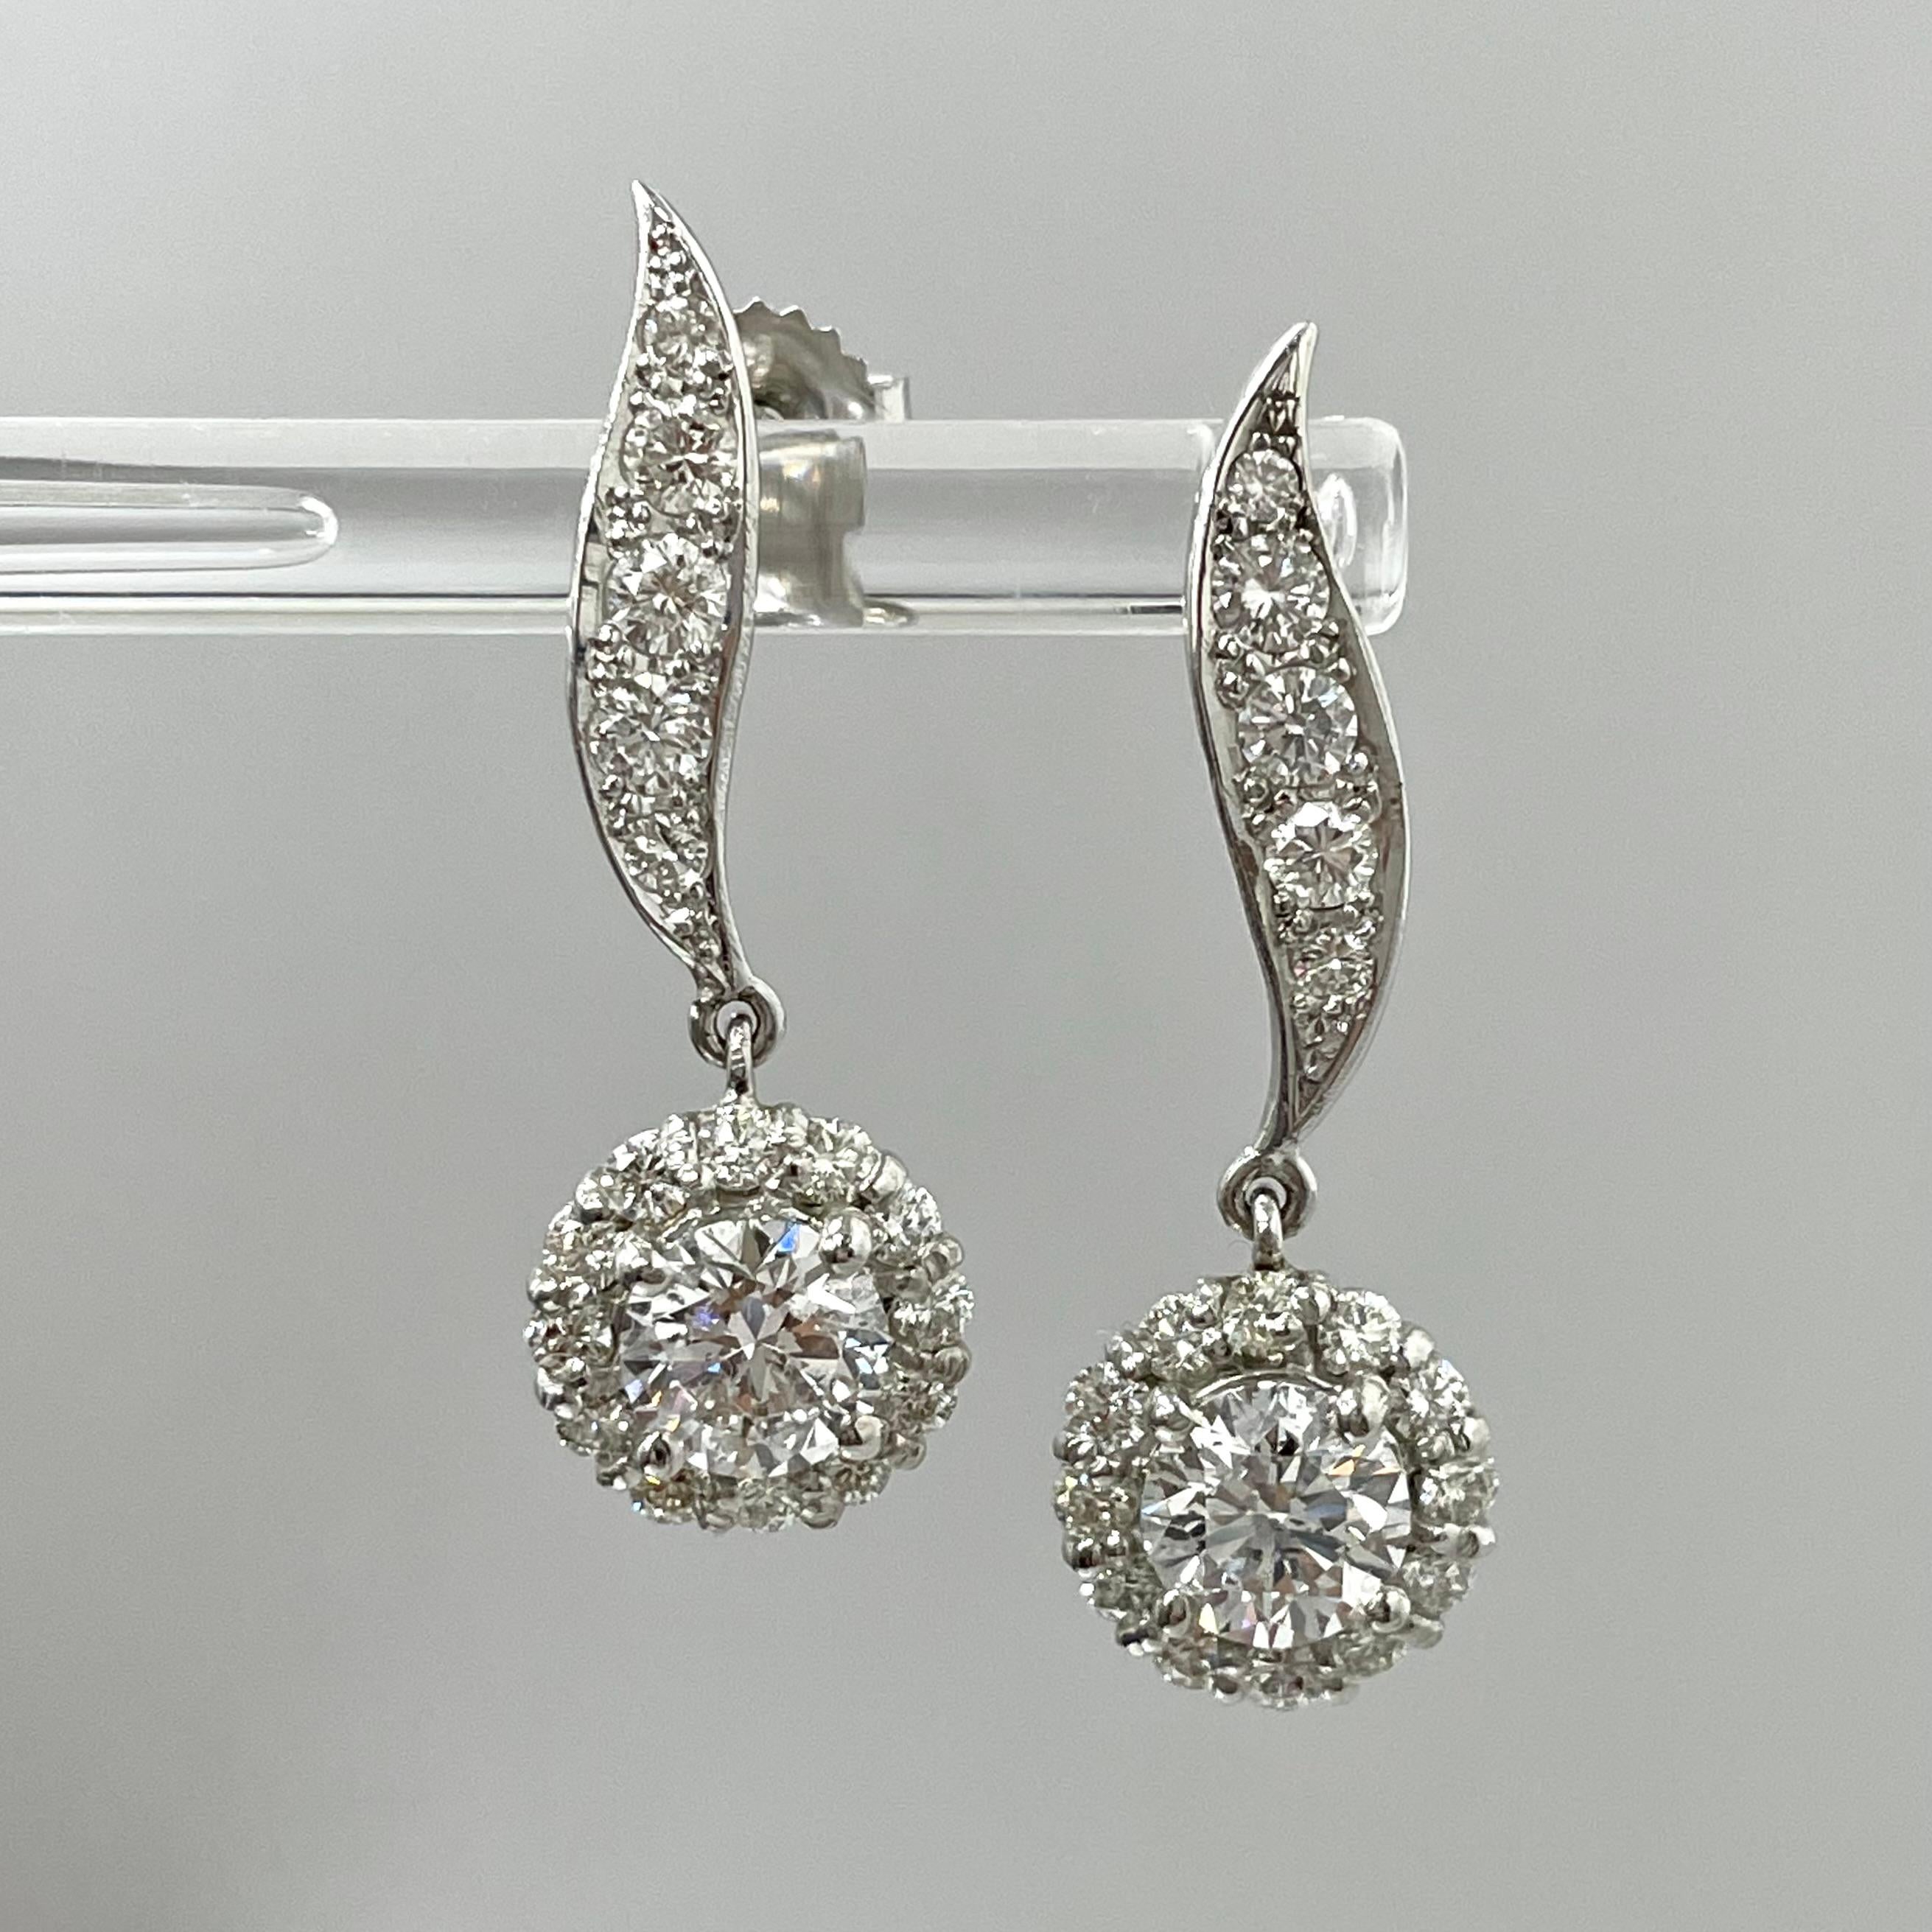 Contemporary Beauvince Leela Leaf Drop Earrings, '3.50 Ct Diamonds', in White Gold For Sale